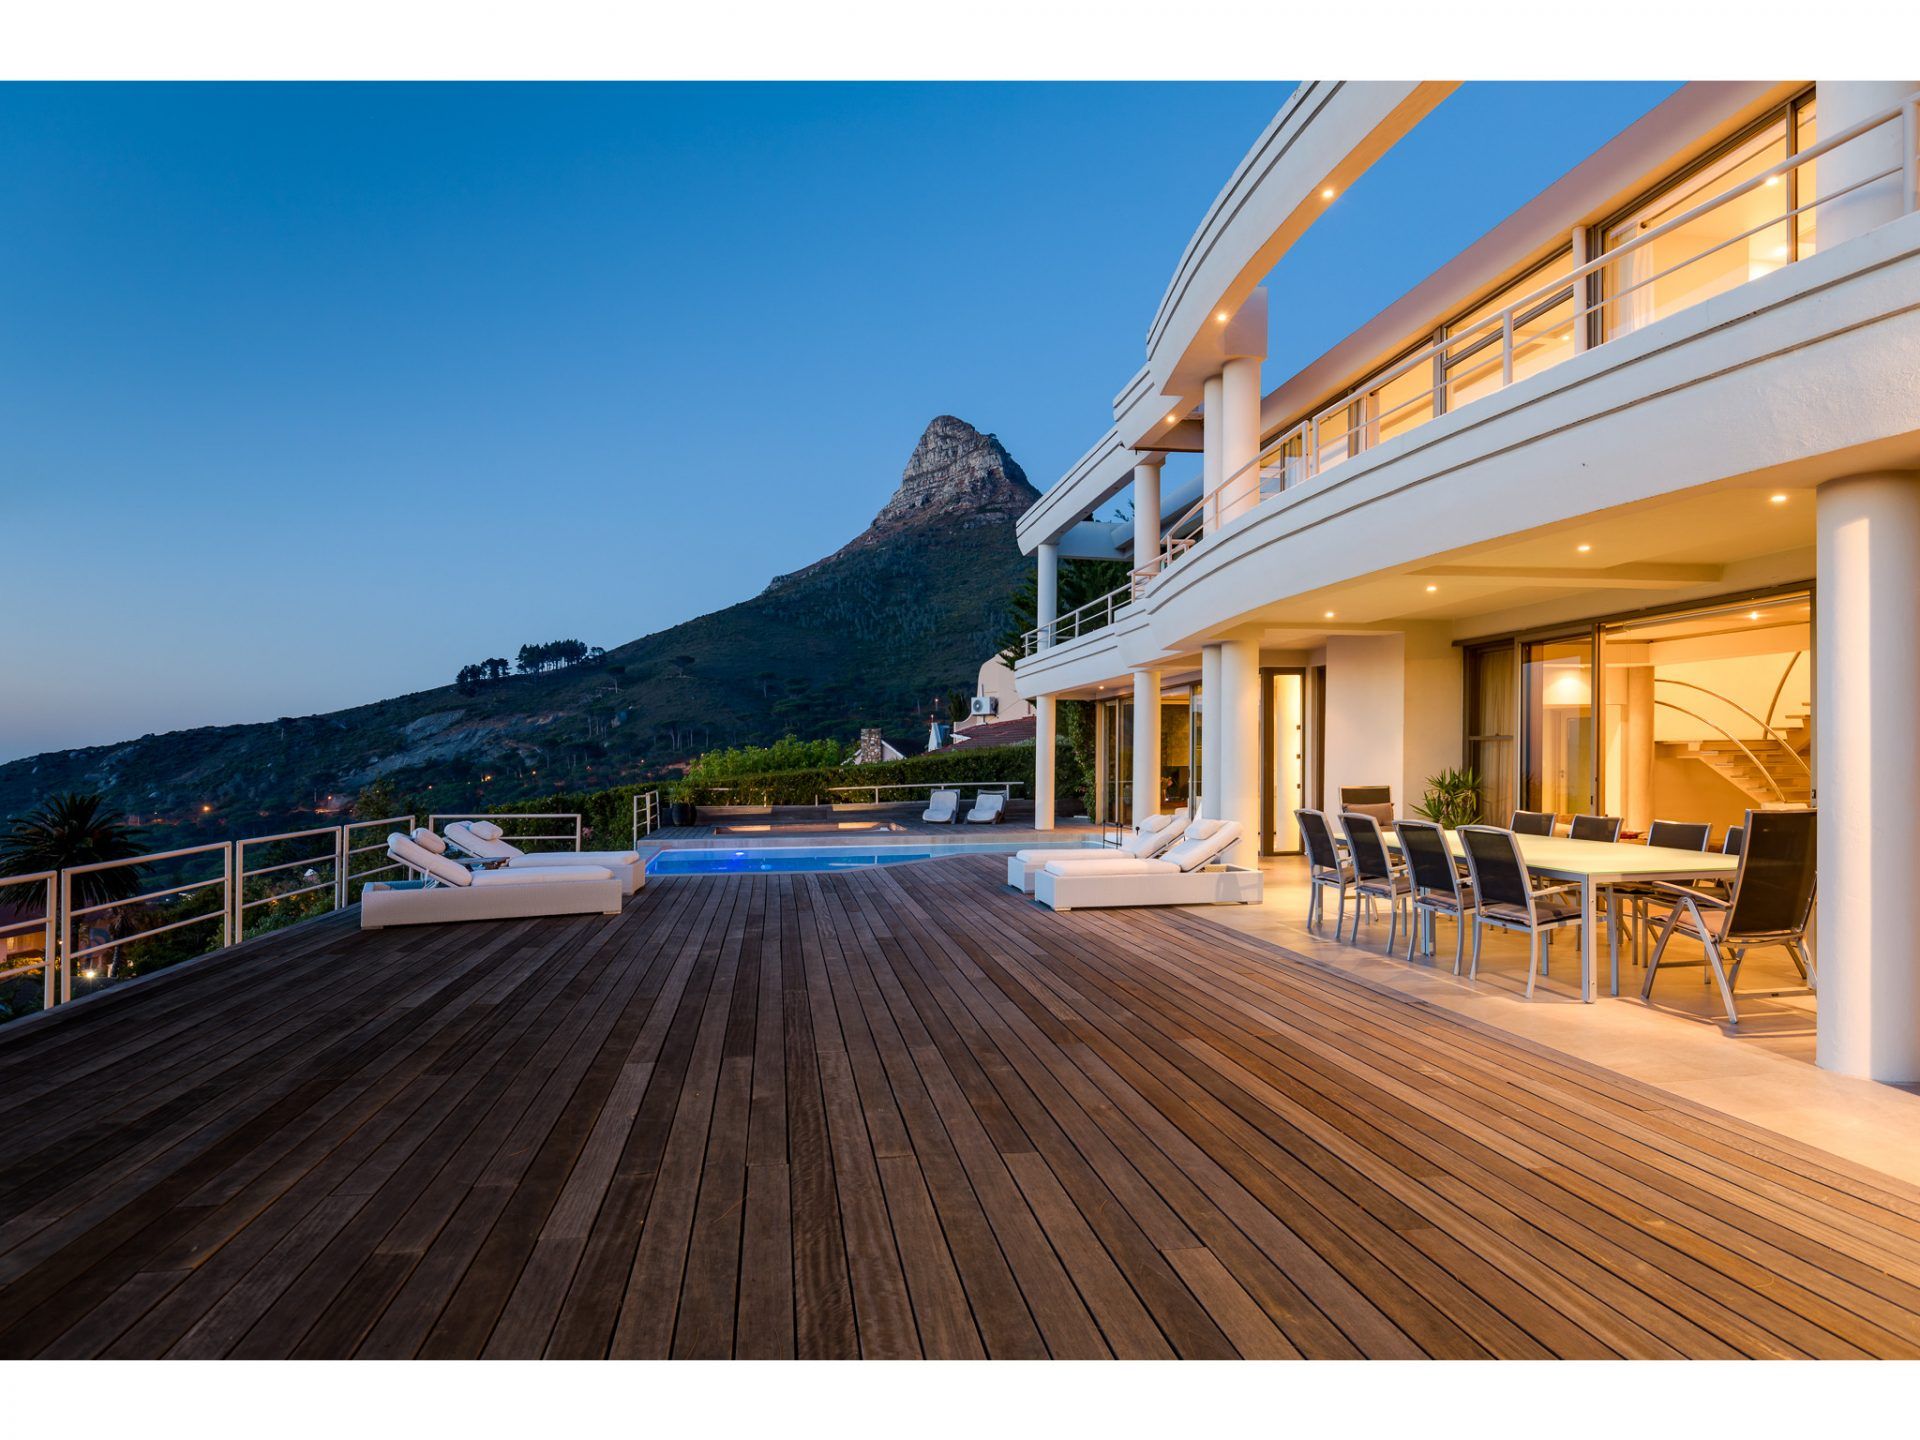 Photo 18 of Geneva Sunsets accommodation in Camps Bay, Cape Town with 6 bedrooms and 7 bathrooms